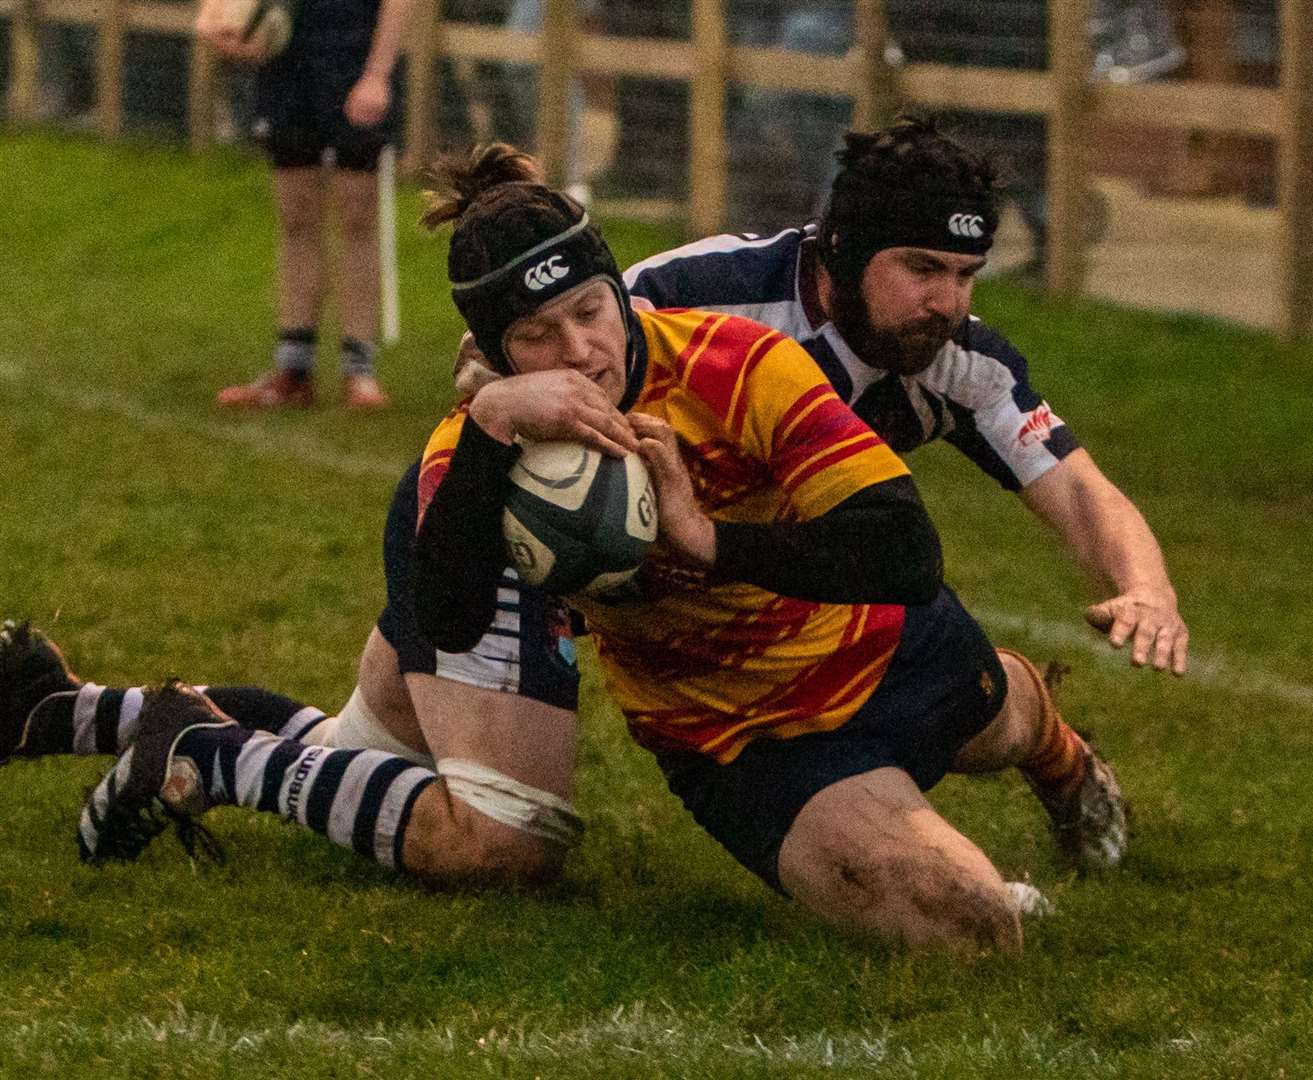 Sean Marriott scores a try for Medway against Sudbury. Picture: Jake Miles Sports Photography